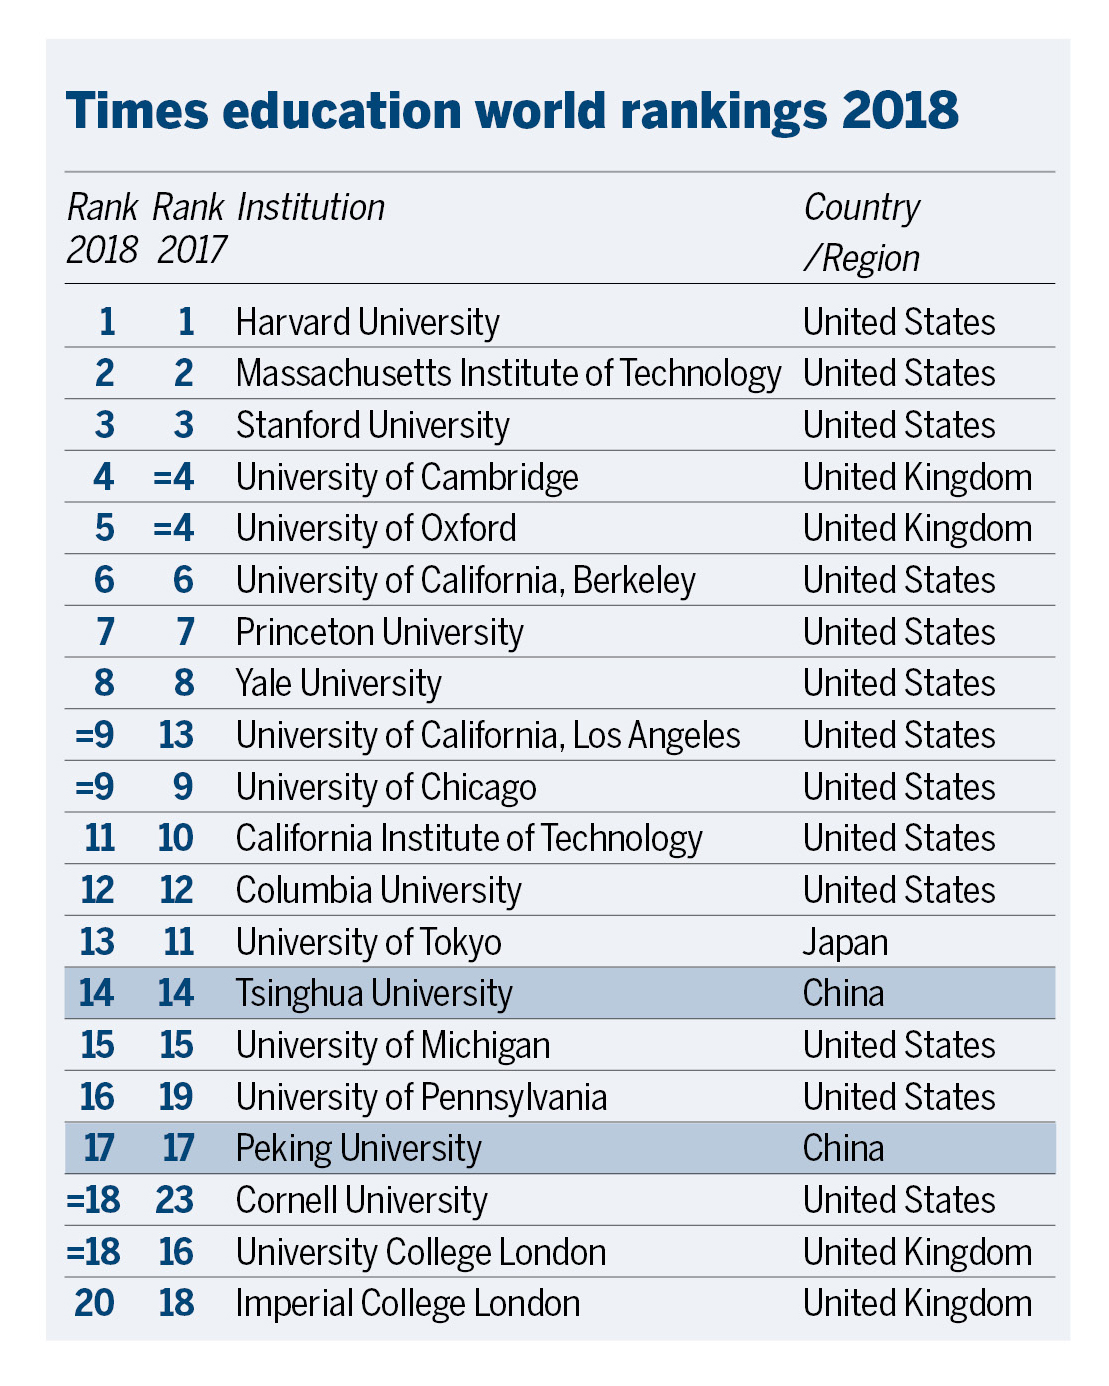 Which Chinese university is top ranking?